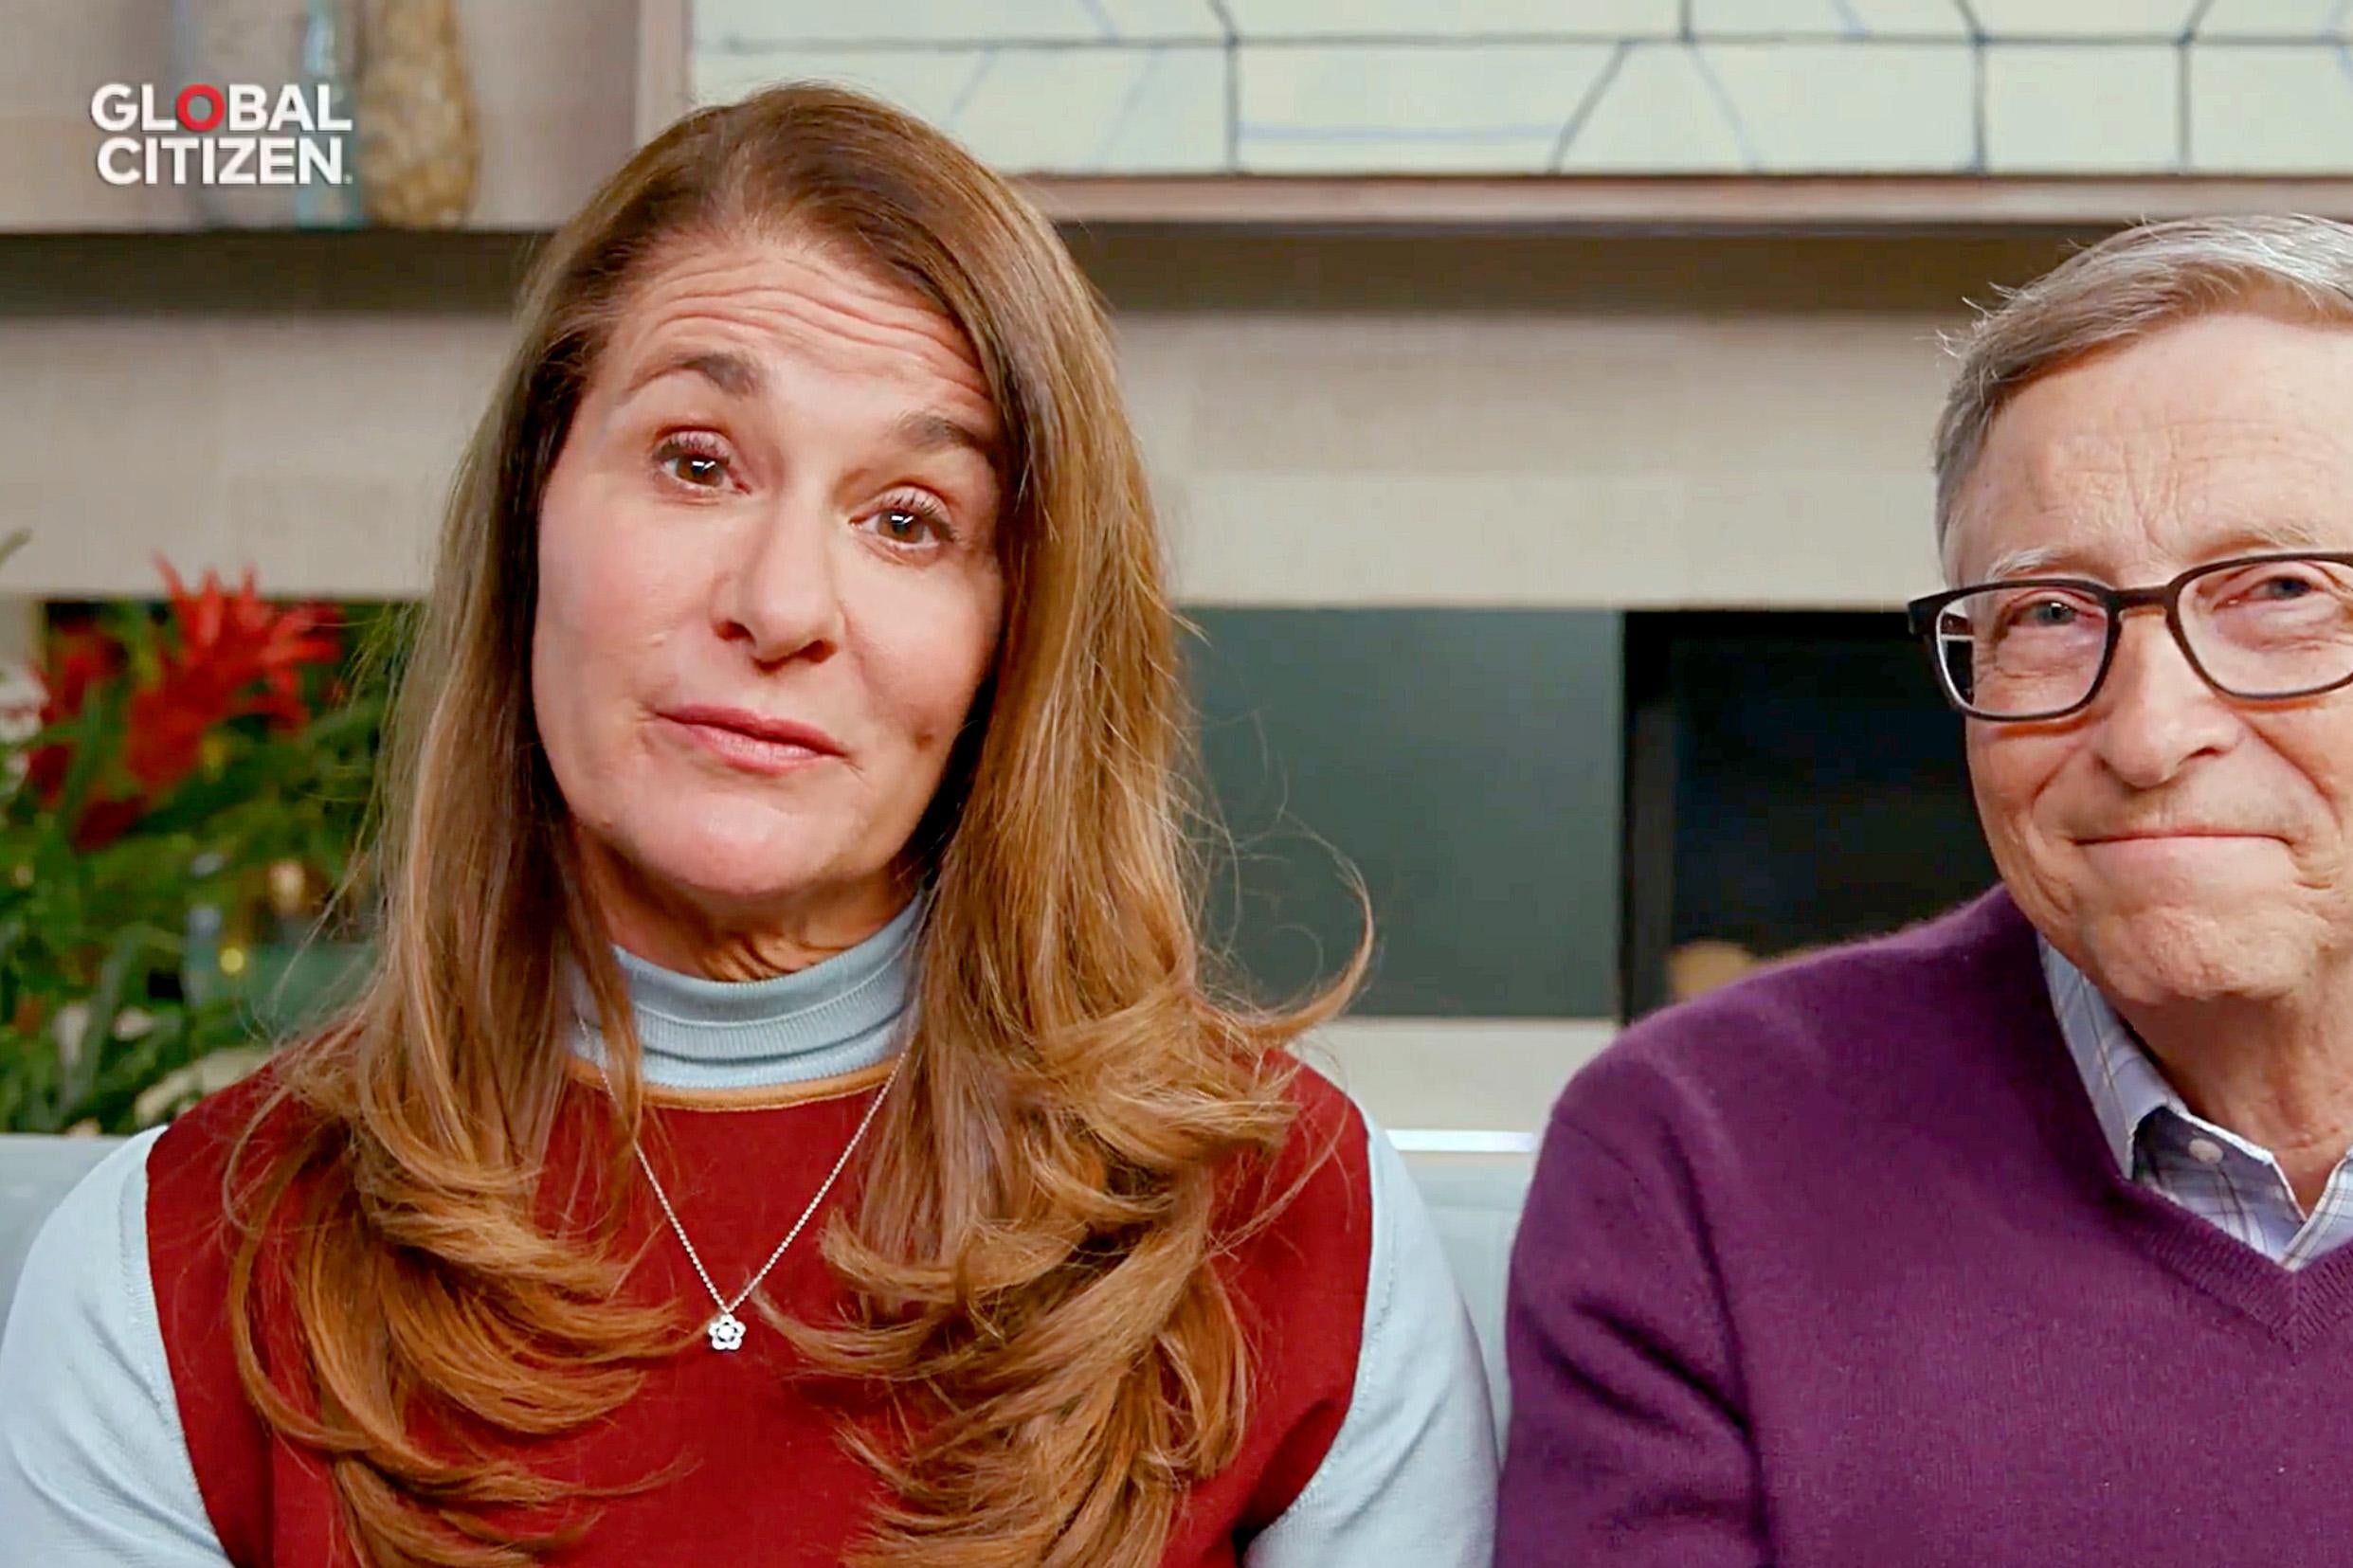 In this screengrab, Melinda Gates and Bill Gates speak during "One World: Together At Home" presented by Global Citizen on April, 18, 2020.